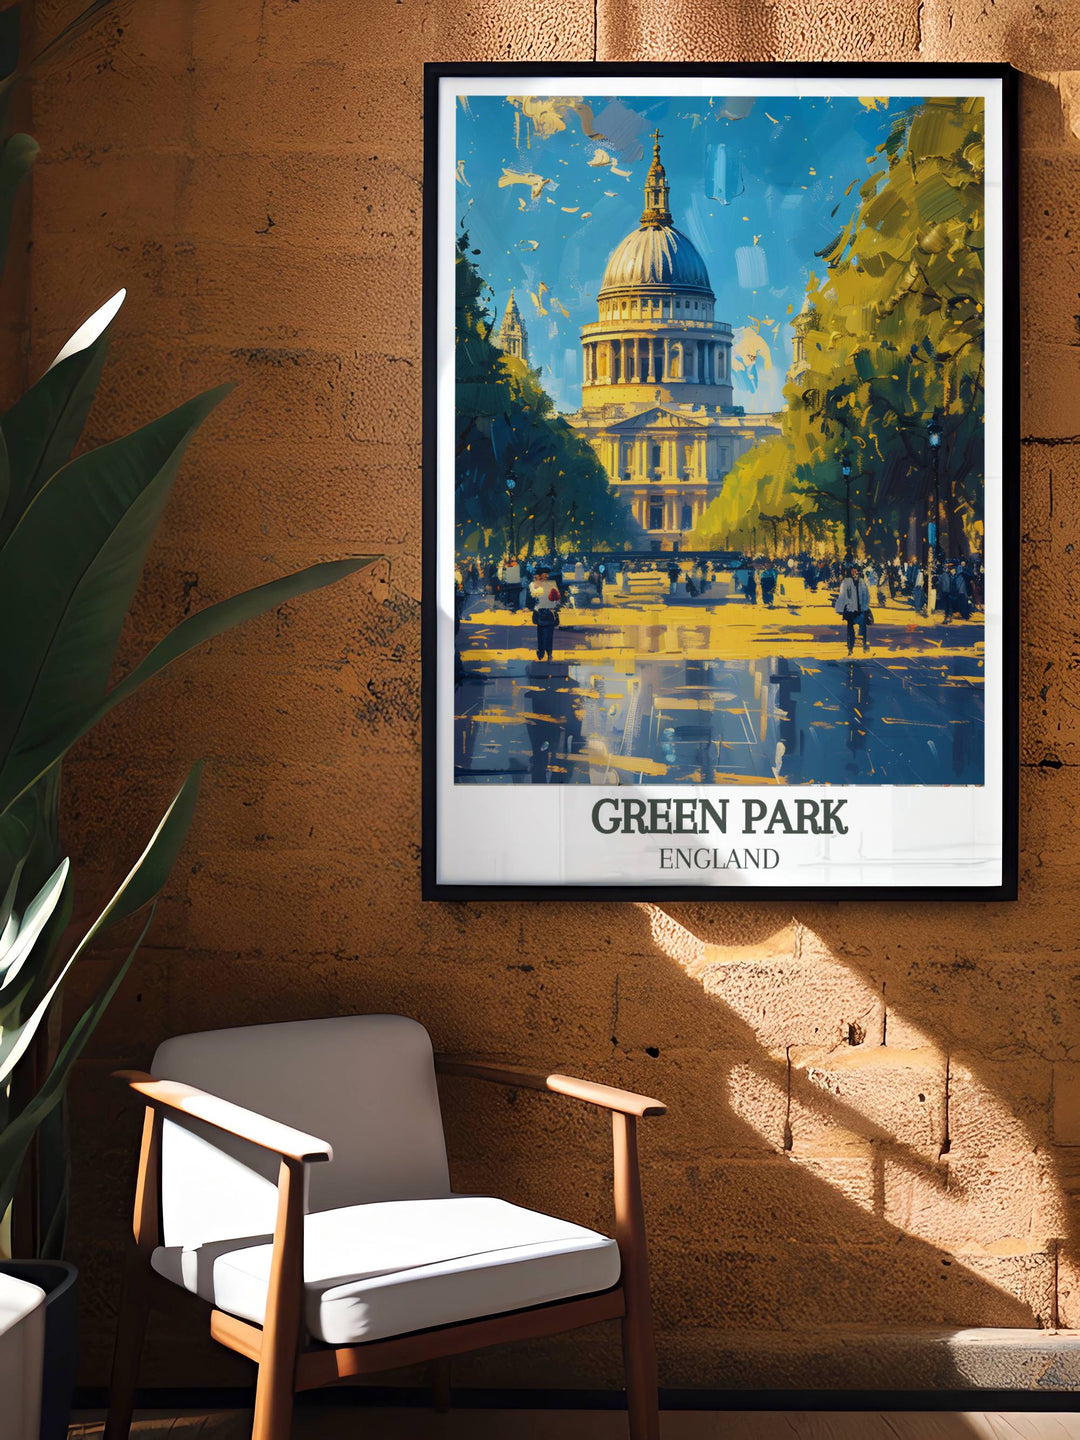 Elegant Green Park painting with Constitution Hill prominently featured capturing the serene atmosphere and historical significance of this London landmark ideal for wall art enthusiasts and travel print collectors.